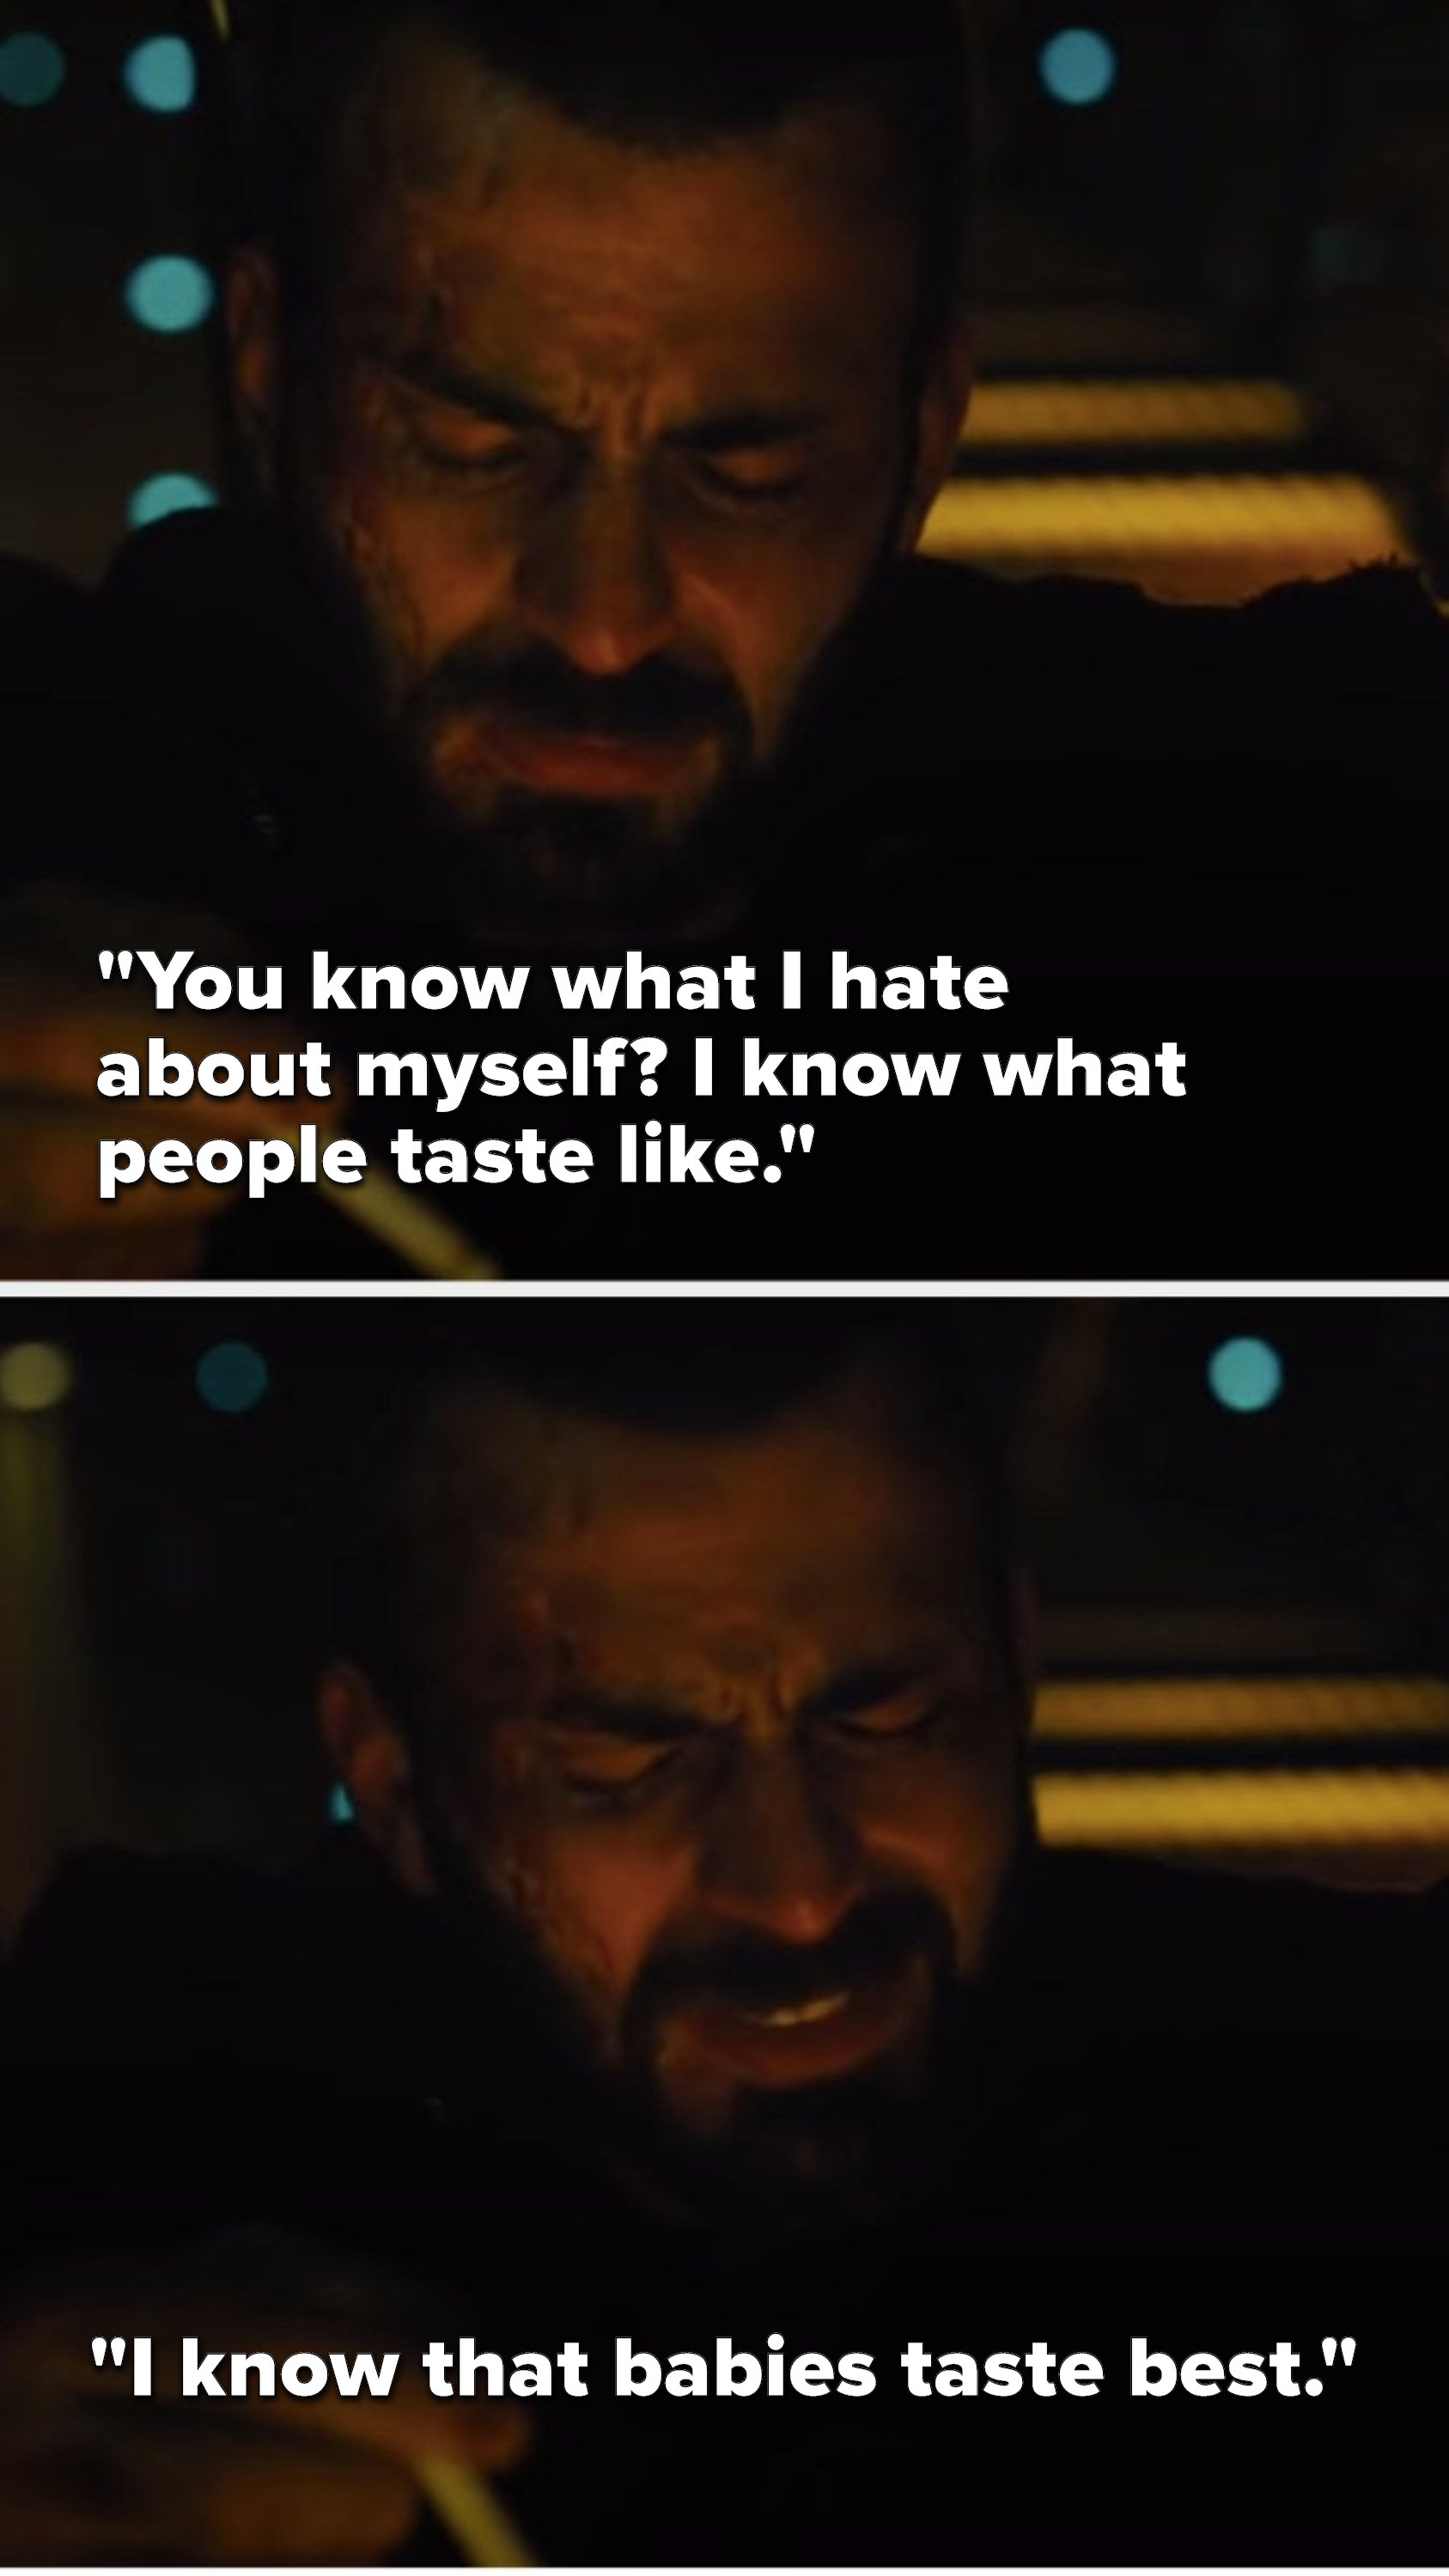 Curtis from Snowpiercer says, &quot;You know what I hate about myself, I know what people taste like, I know that babies taste best&quot;